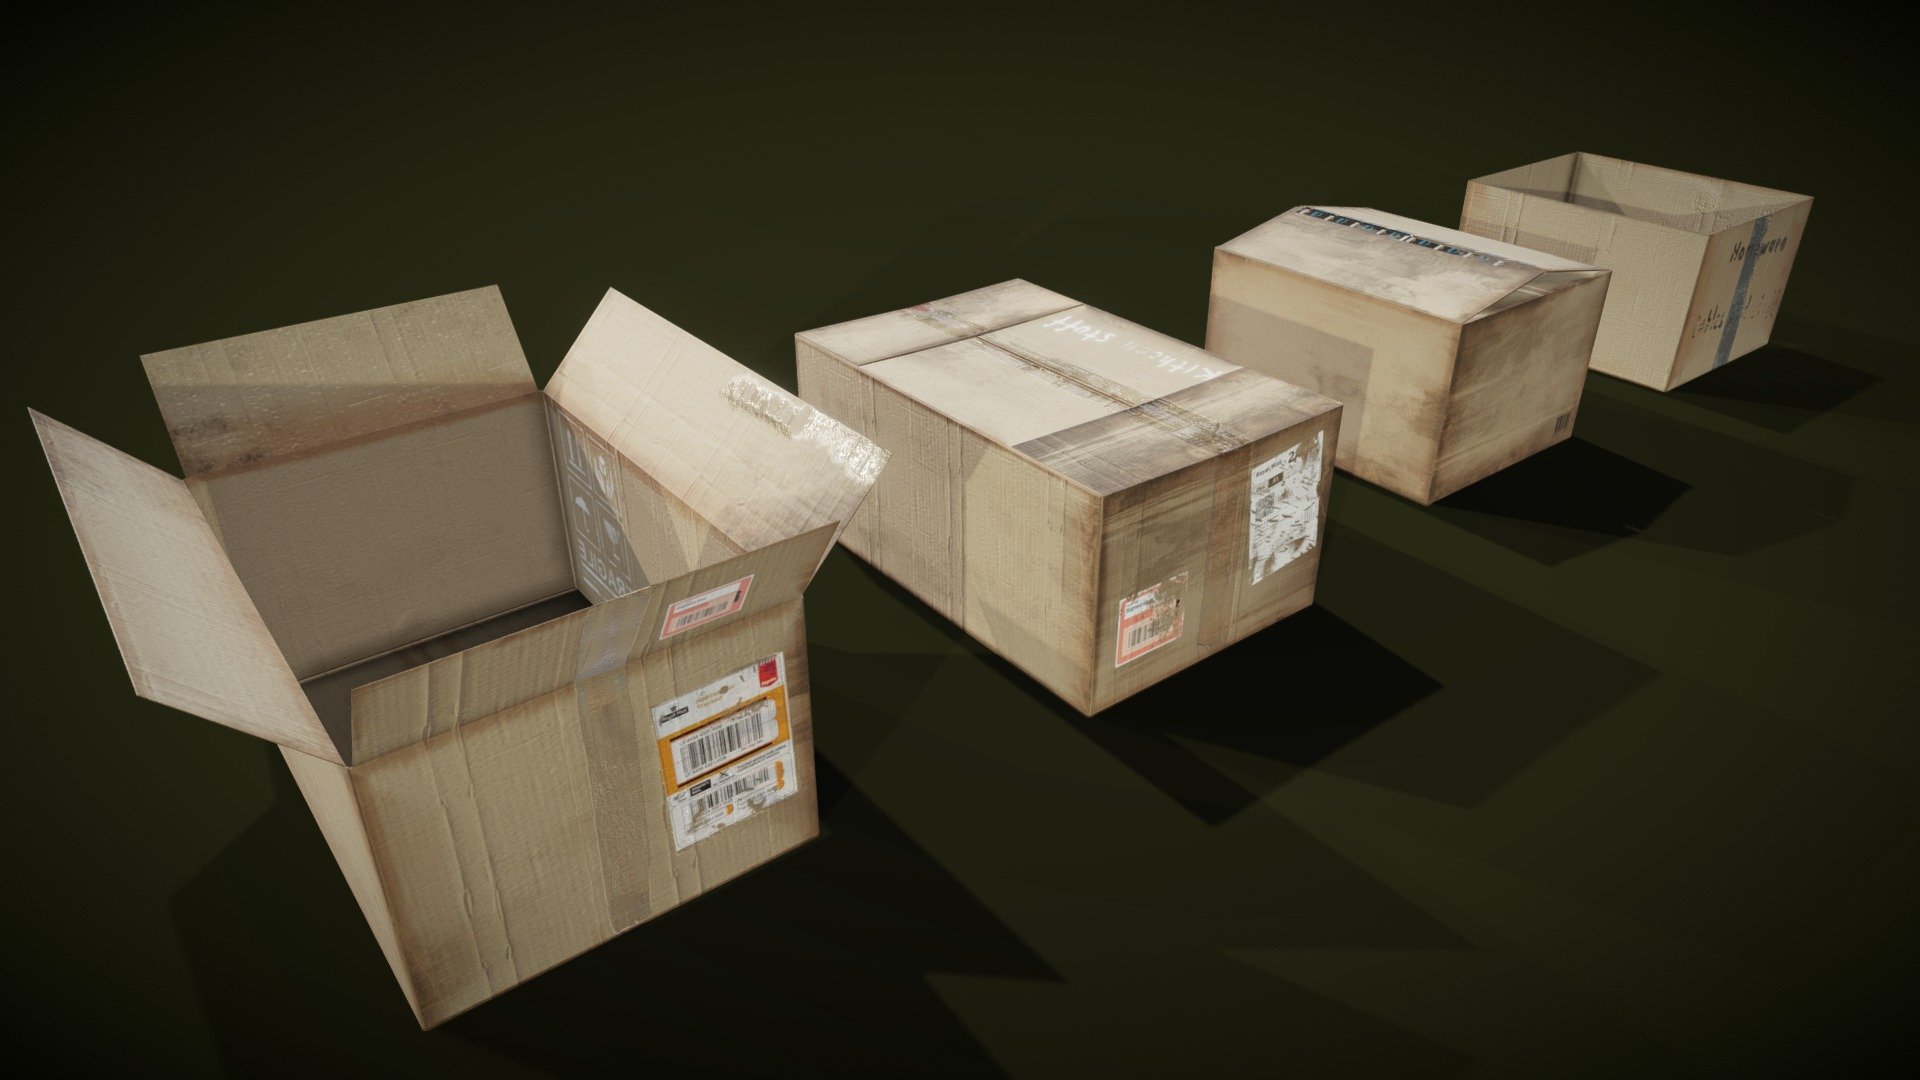 Old cardboard boxes.  Useful prop for any sort of enviroment. 

These are all UDIM tiled and come with 2k and additional 4k PBR textures 3d model